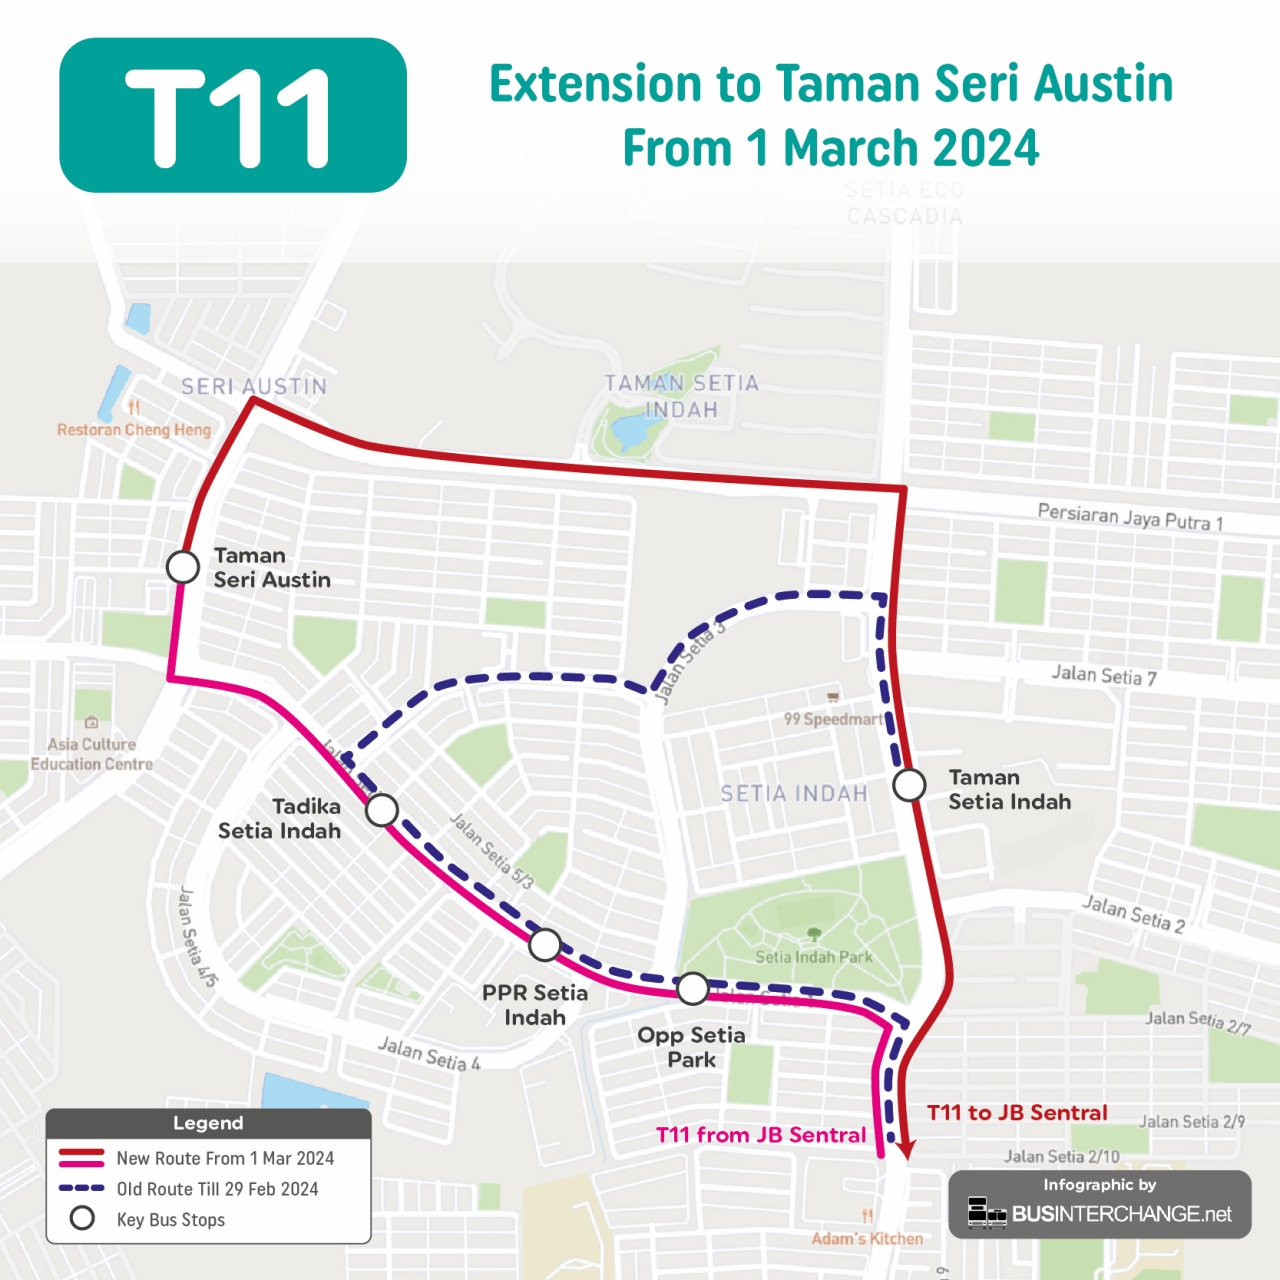 myBas Johor Bahru Route T11 extends to Taman Seri Austin from 1 March 2024